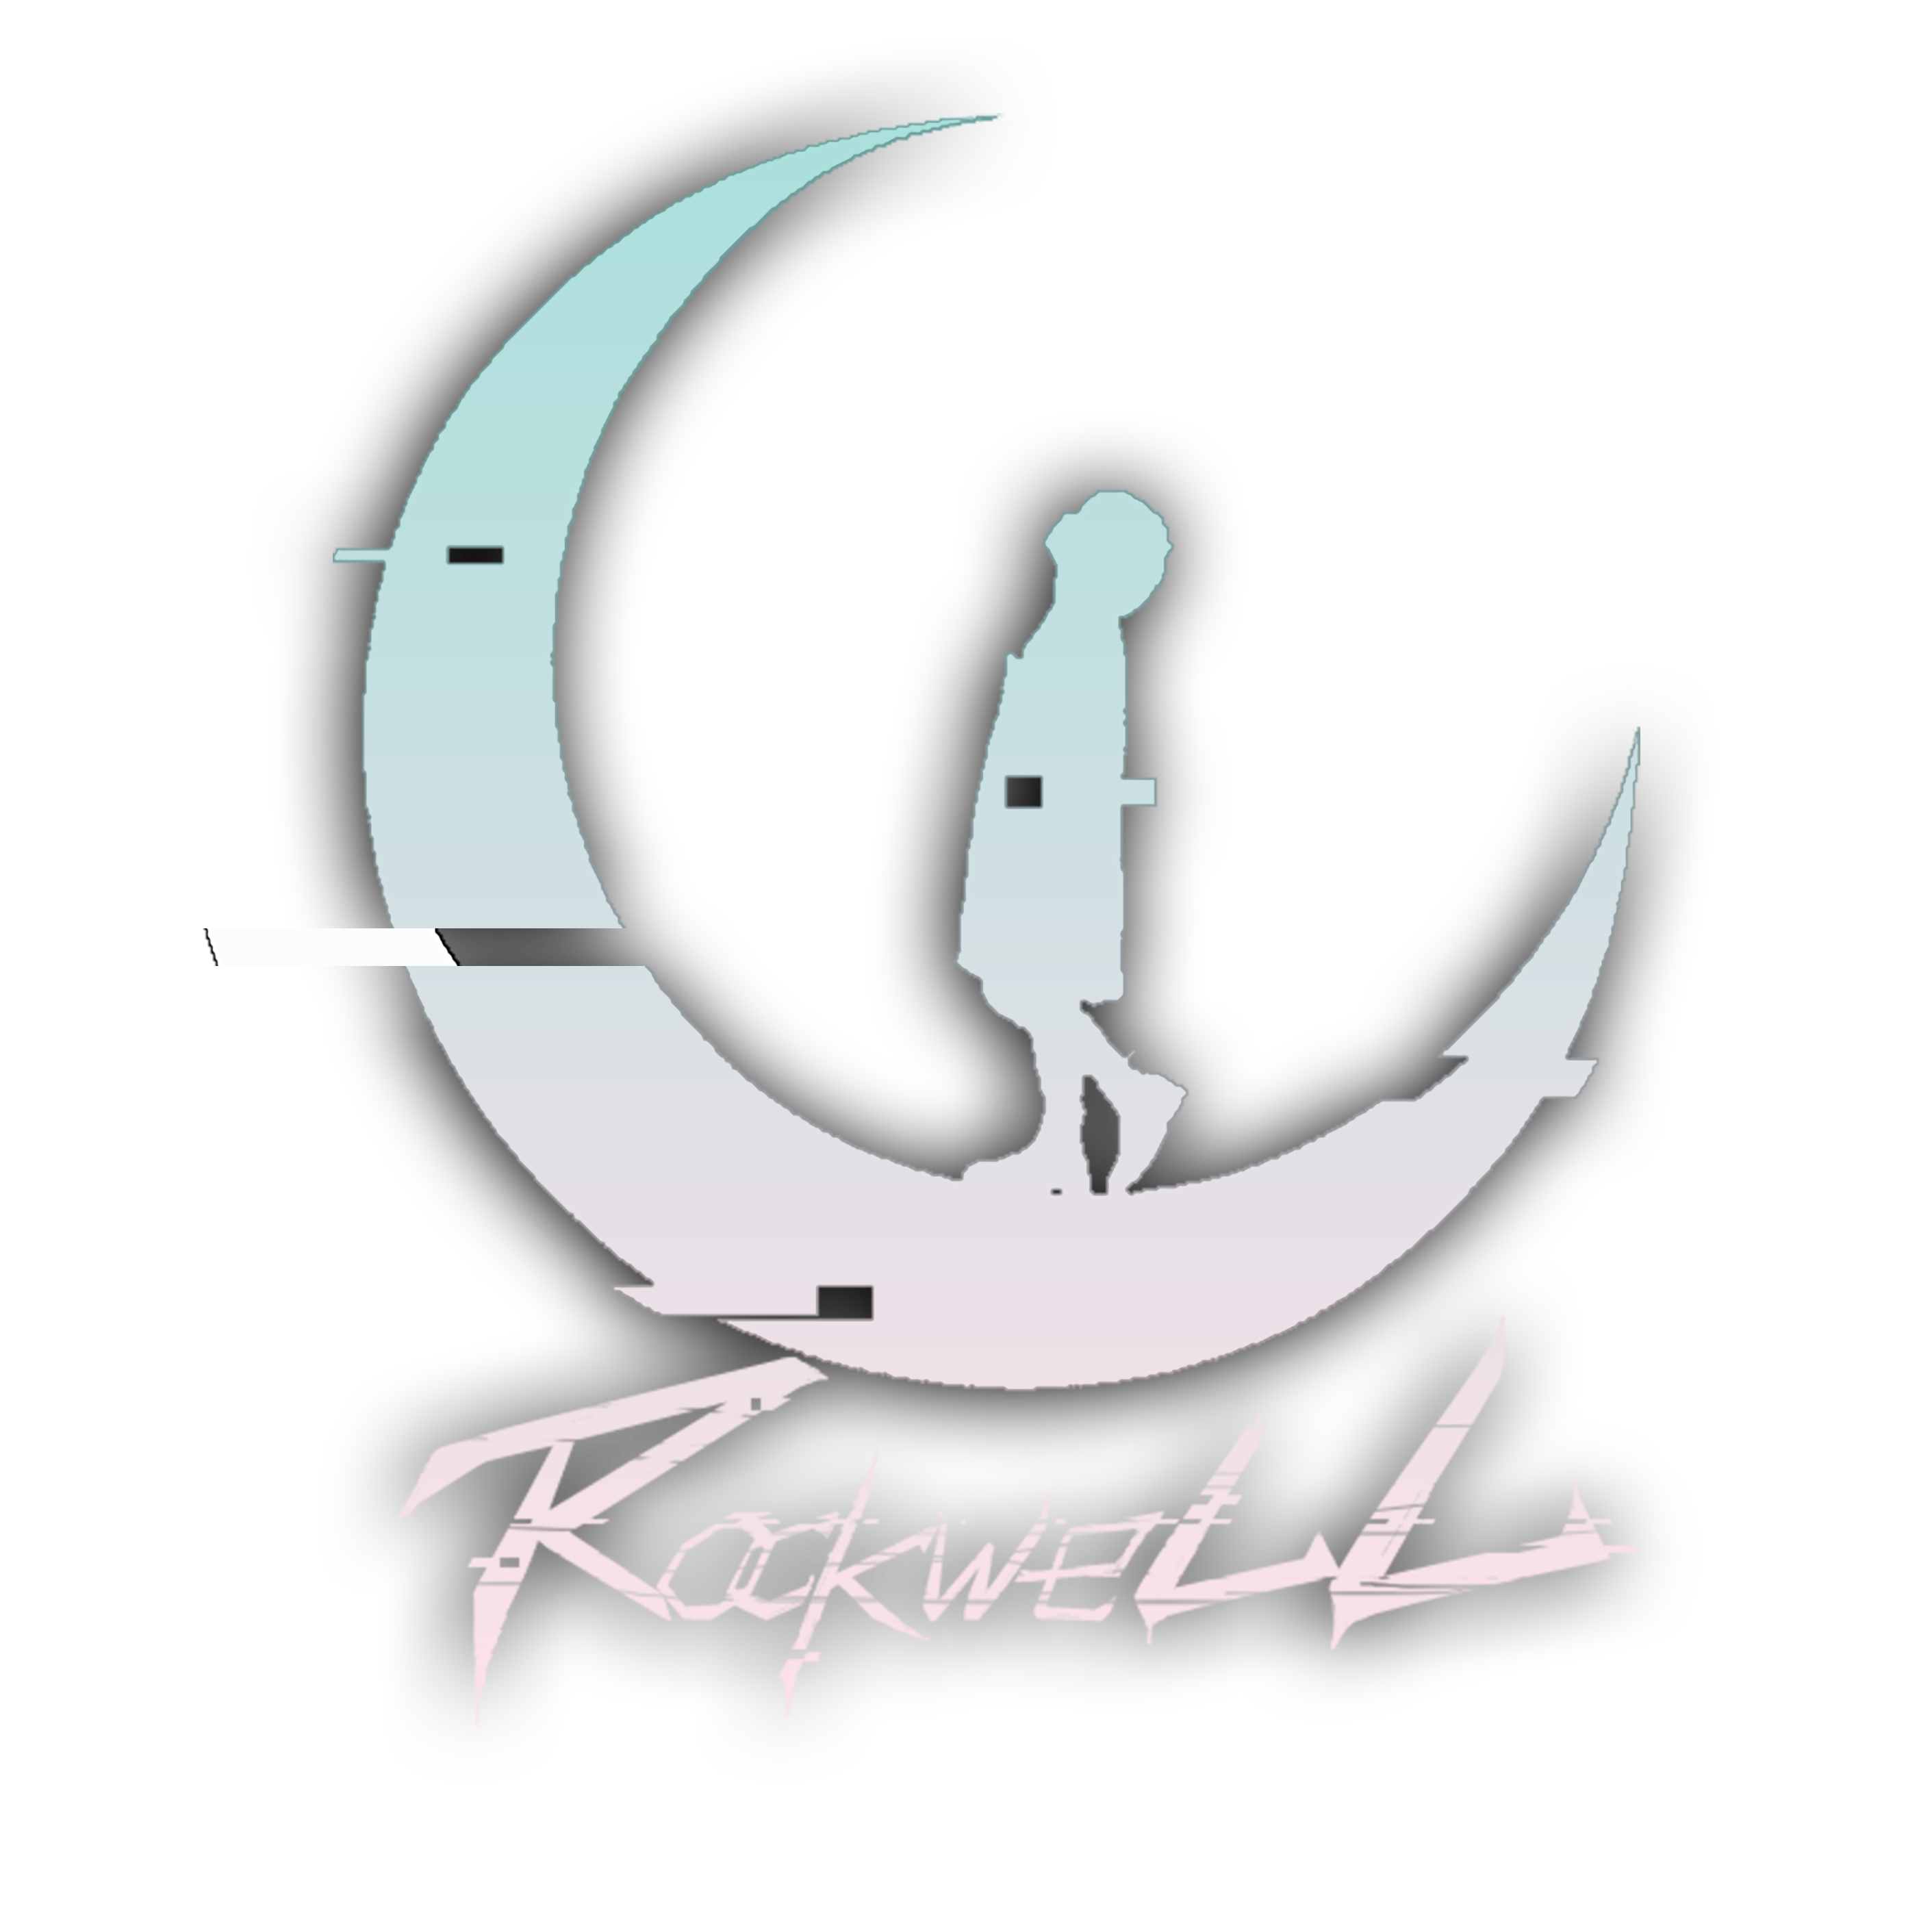 Rockwell Official site